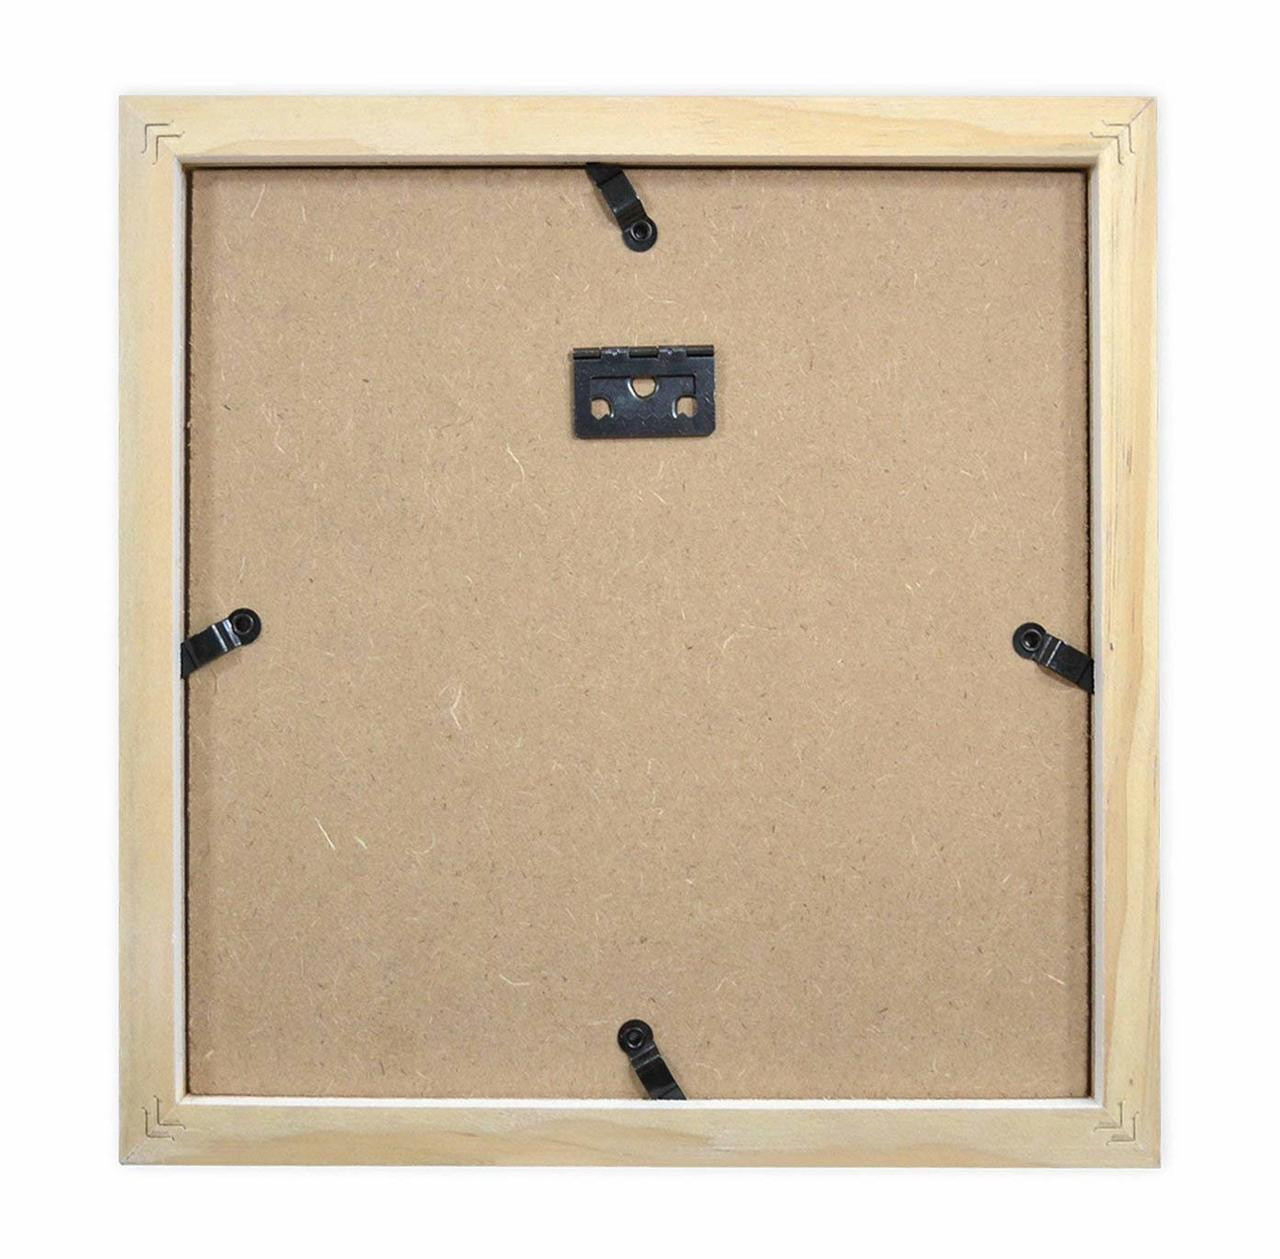 Pack of 3 8x8 Picture Frame with Mat for 4x4 Photo Square Wall